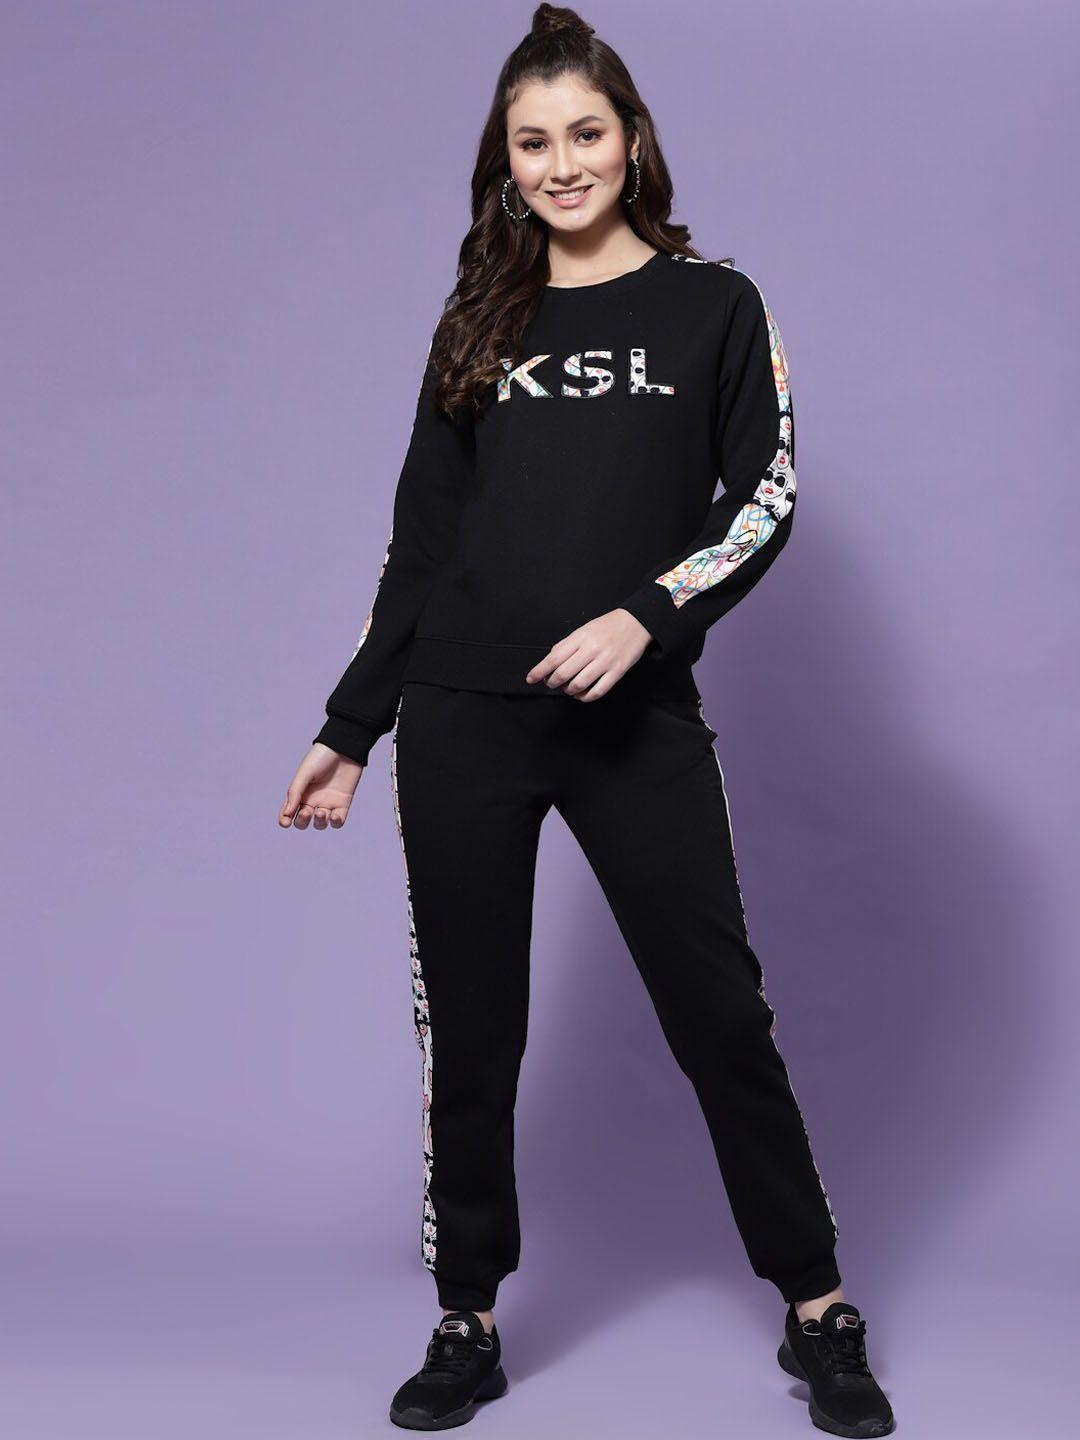 kassually women fleece graphic printed round neck tracksuits